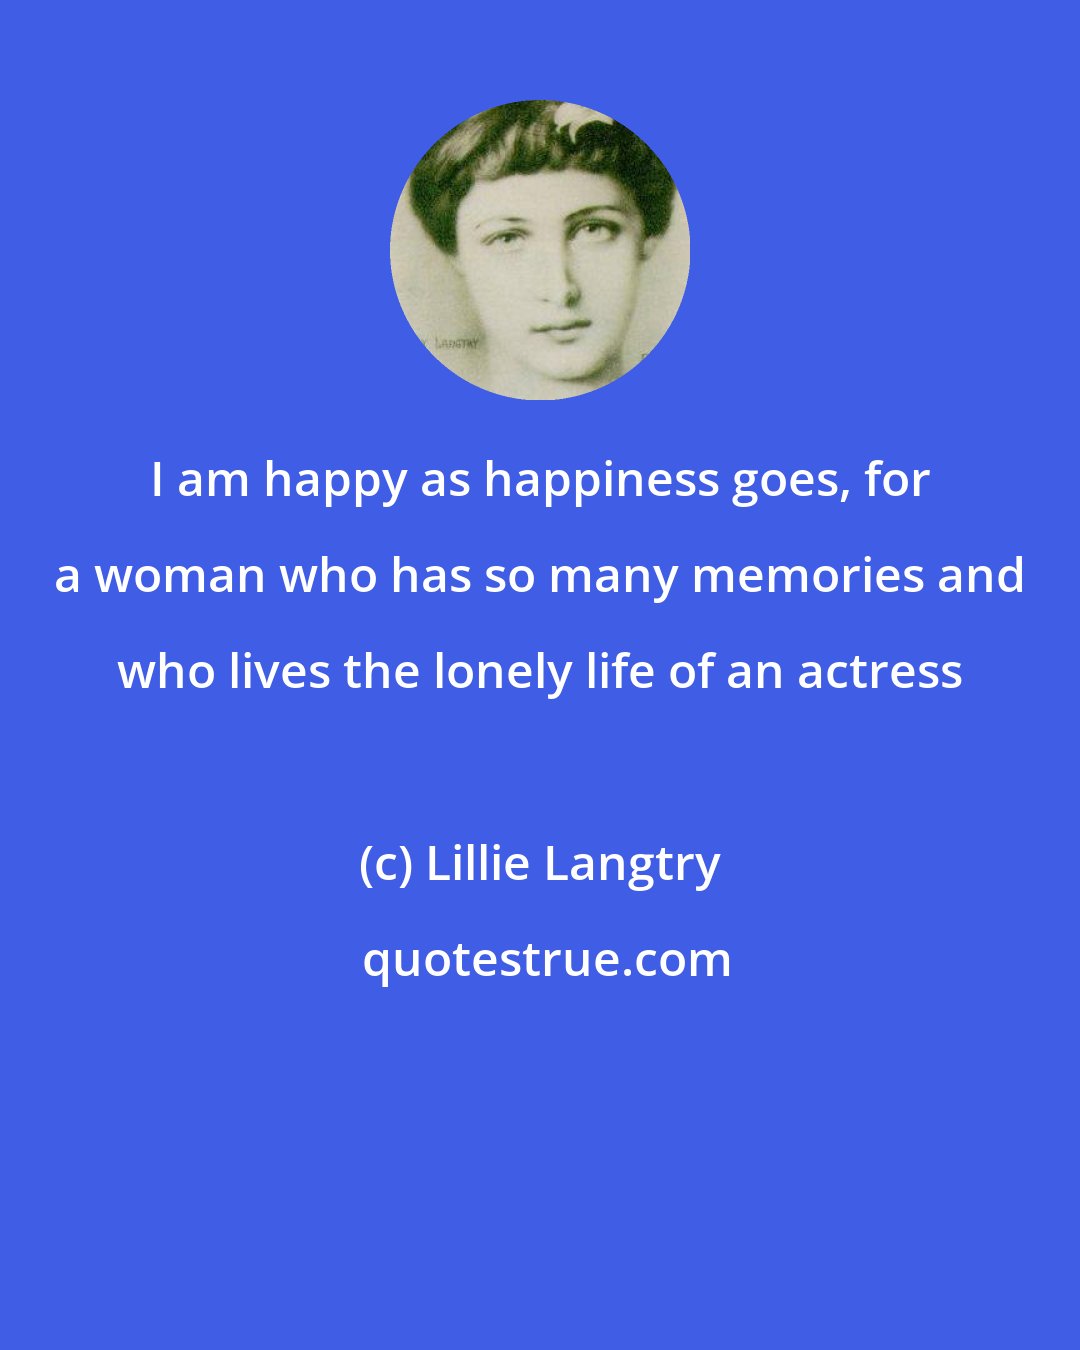 Lillie Langtry: I am happy as happiness goes, for a woman who has so many memories and who lives the lonely life of an actress